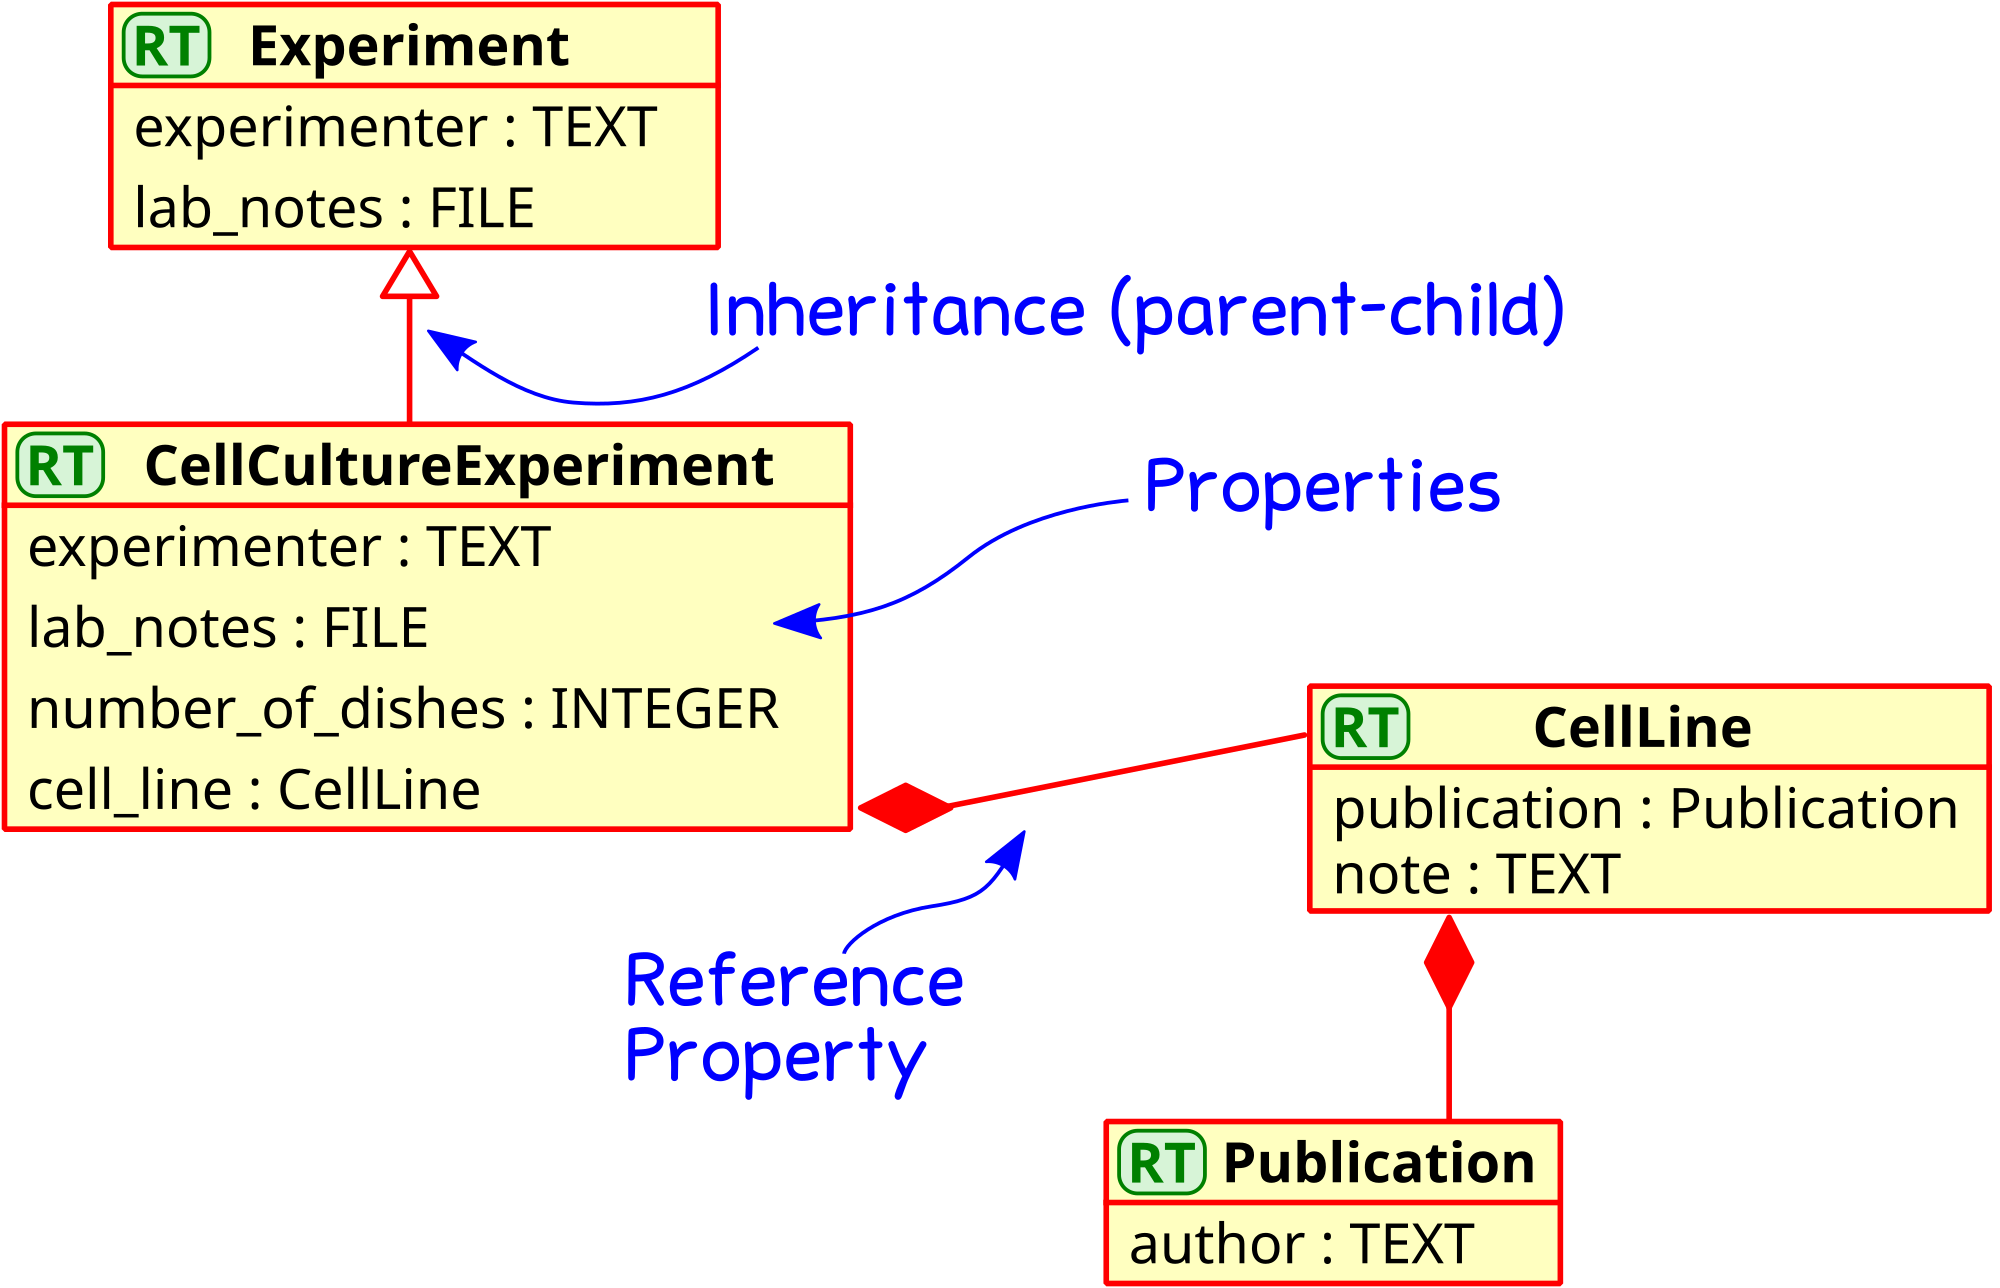 The first data model extended by inheritance and references